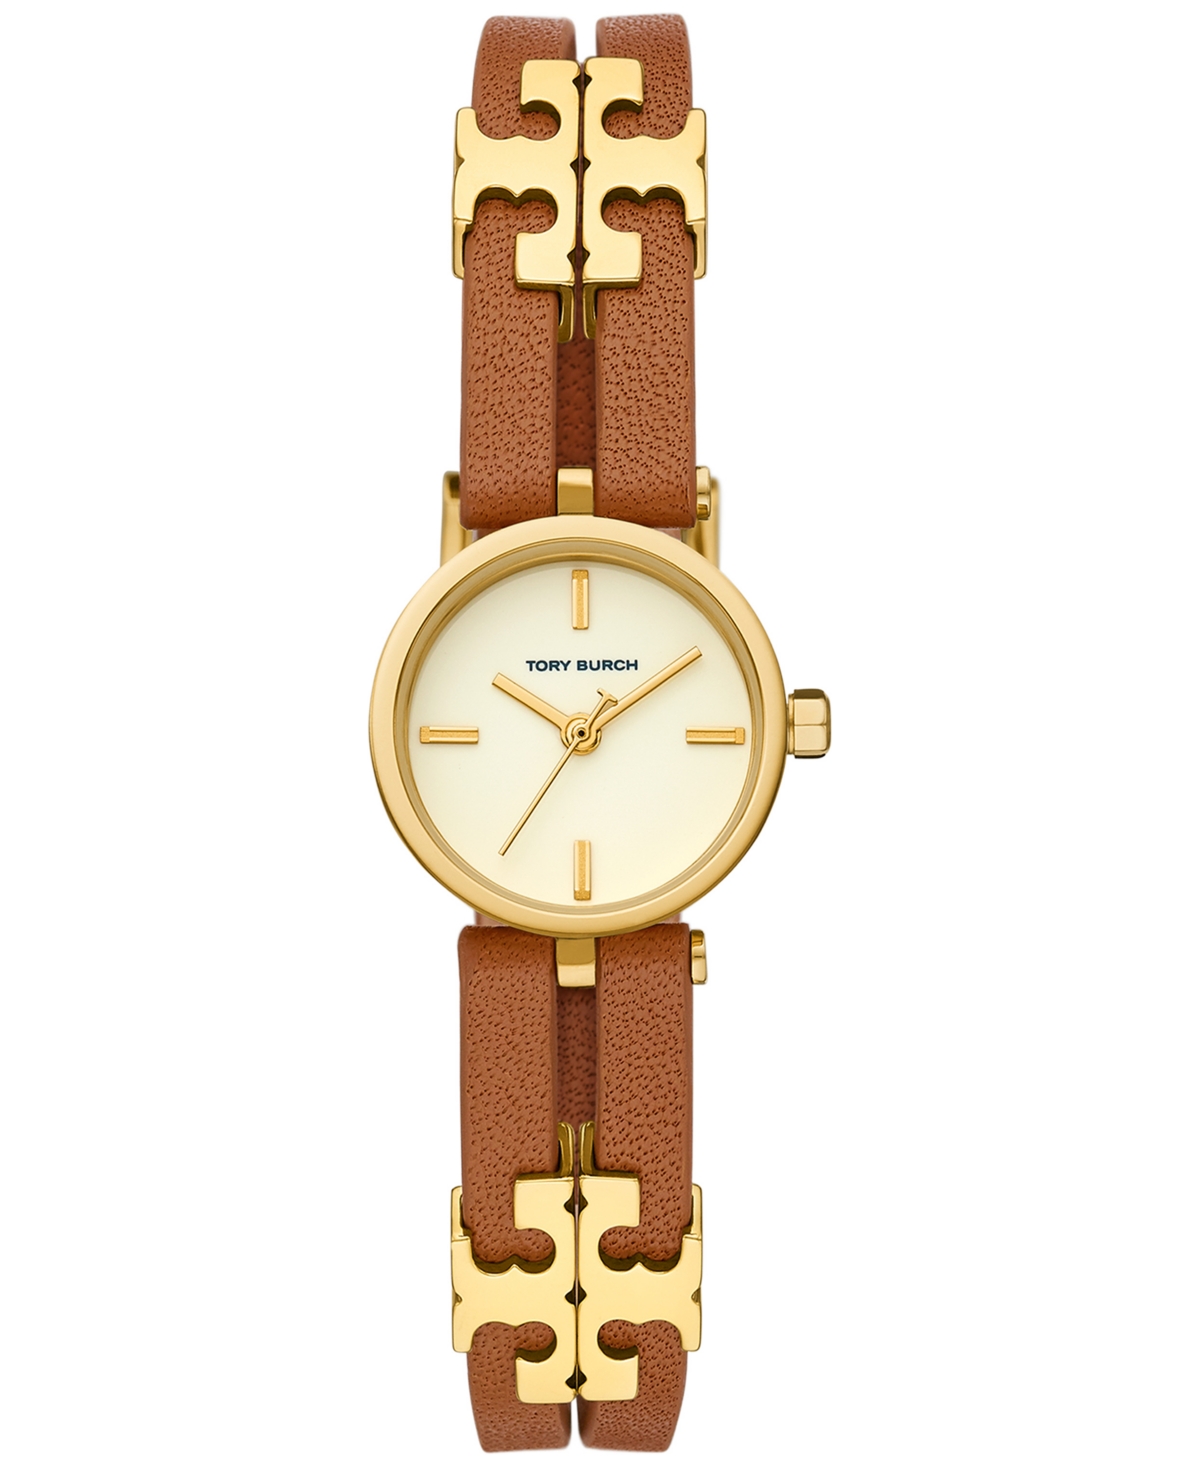 Tory Burch Women's Gold-Tone Logo Brown Leather Strap Watch 22mm & Reviews  - All Watches - Jewelry & Watches - Macy's